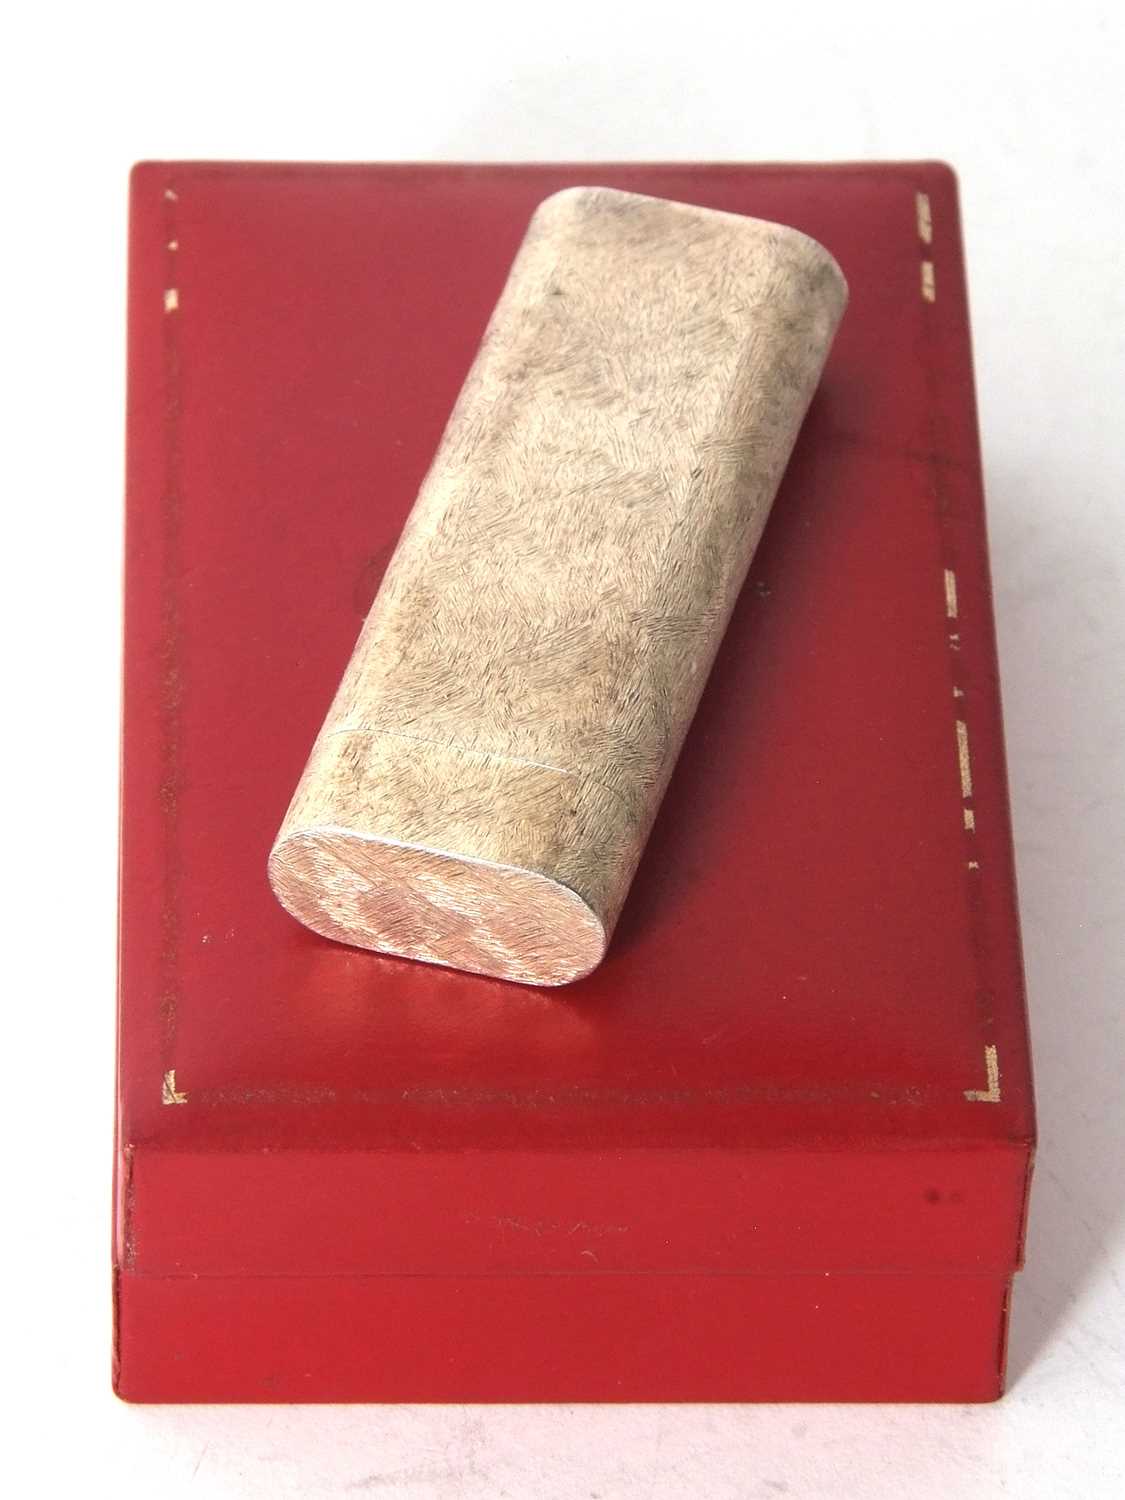 Cased Cartier silver plated lighter, stamped Cartier Paris 34335, Swiss made, 7cm long - Image 2 of 6